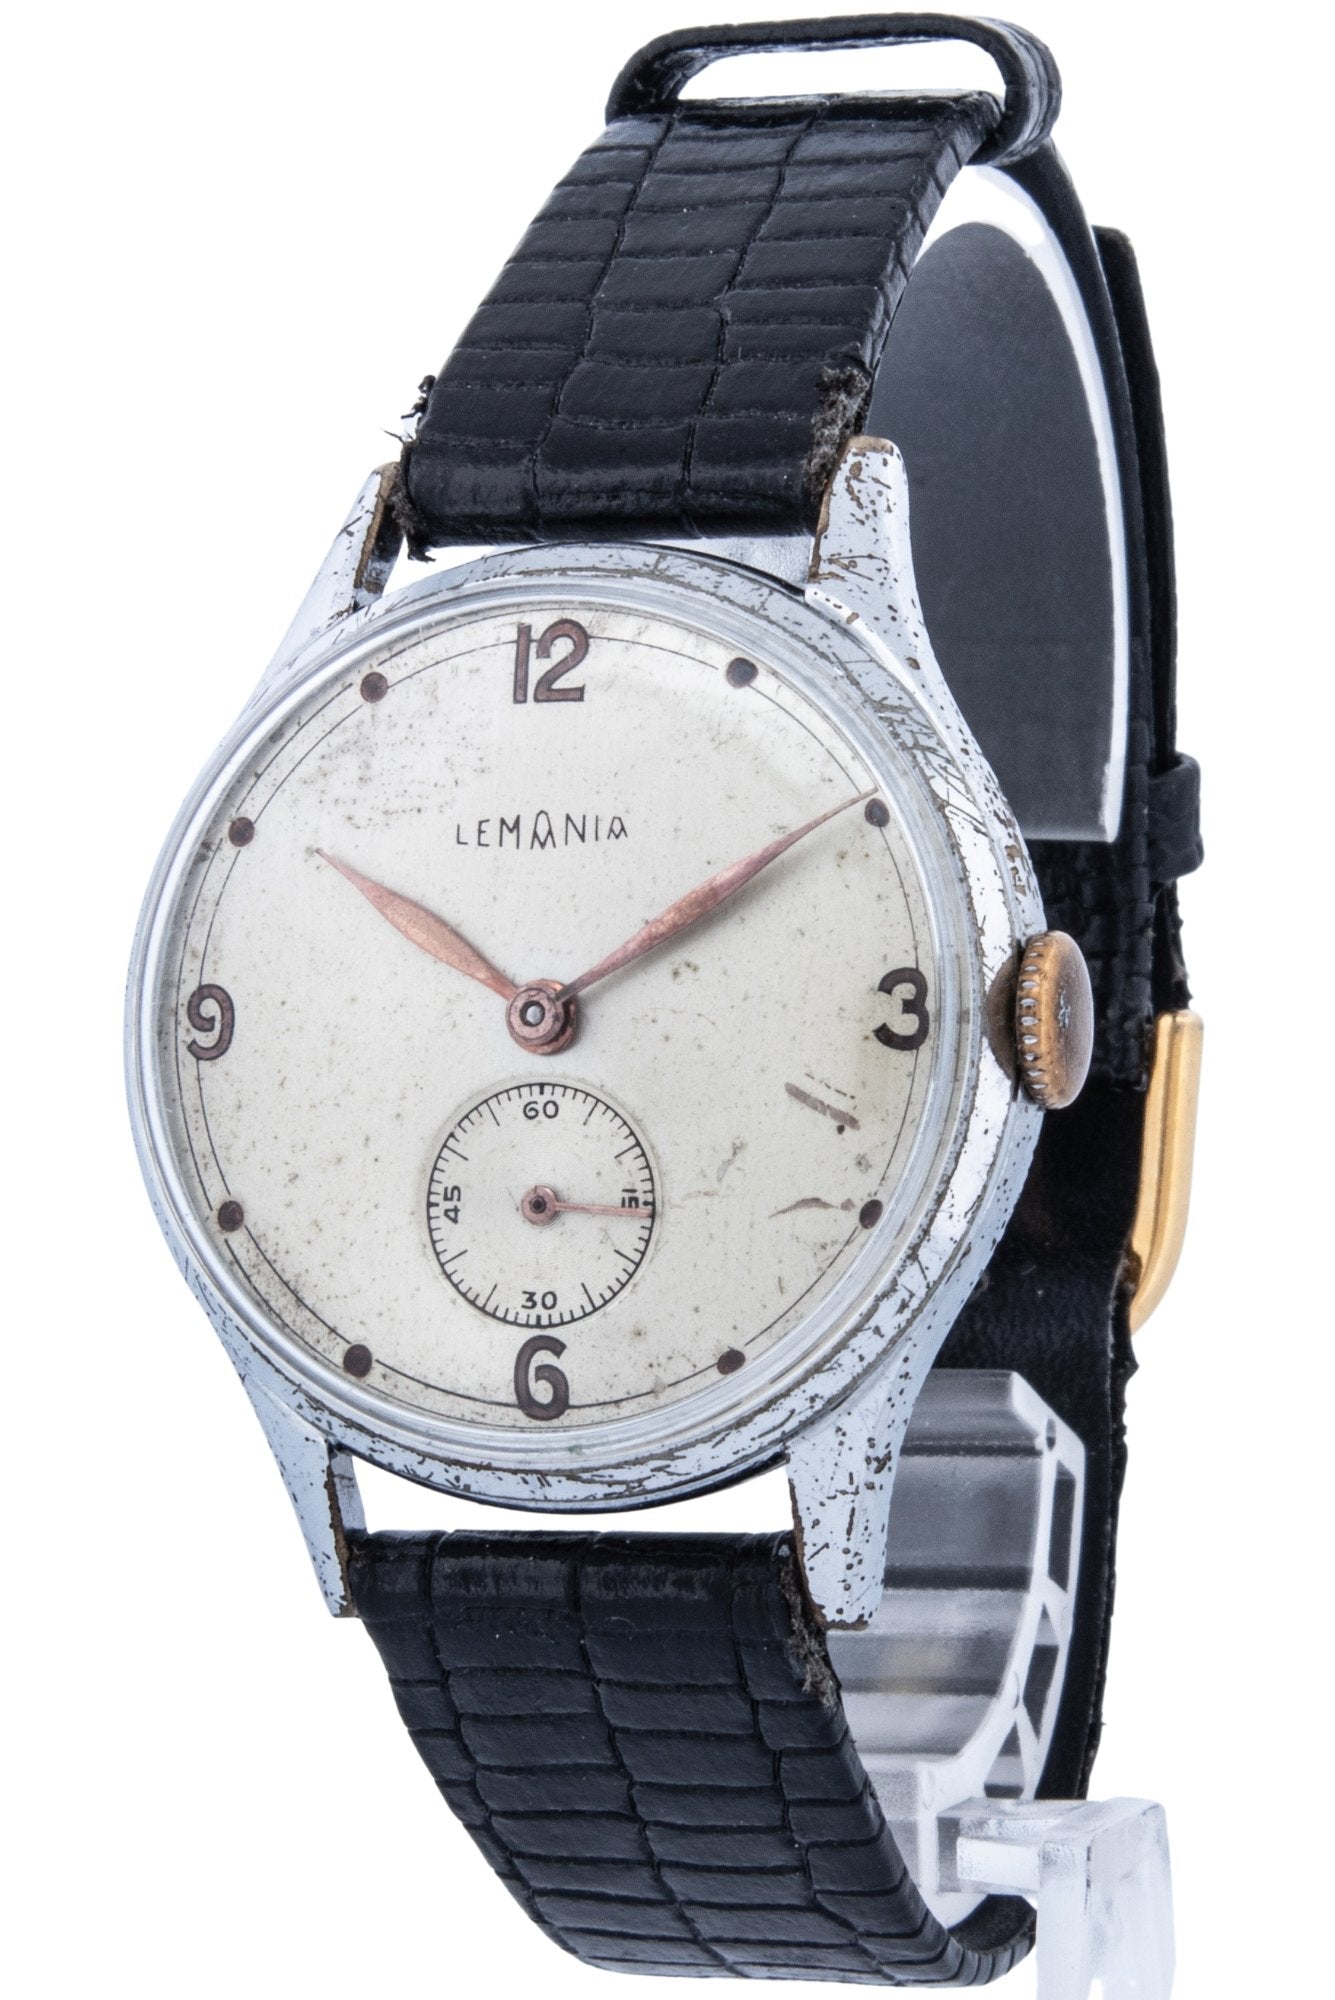 Lemania Sub Secondhand - Counting Time Watch Purveyors